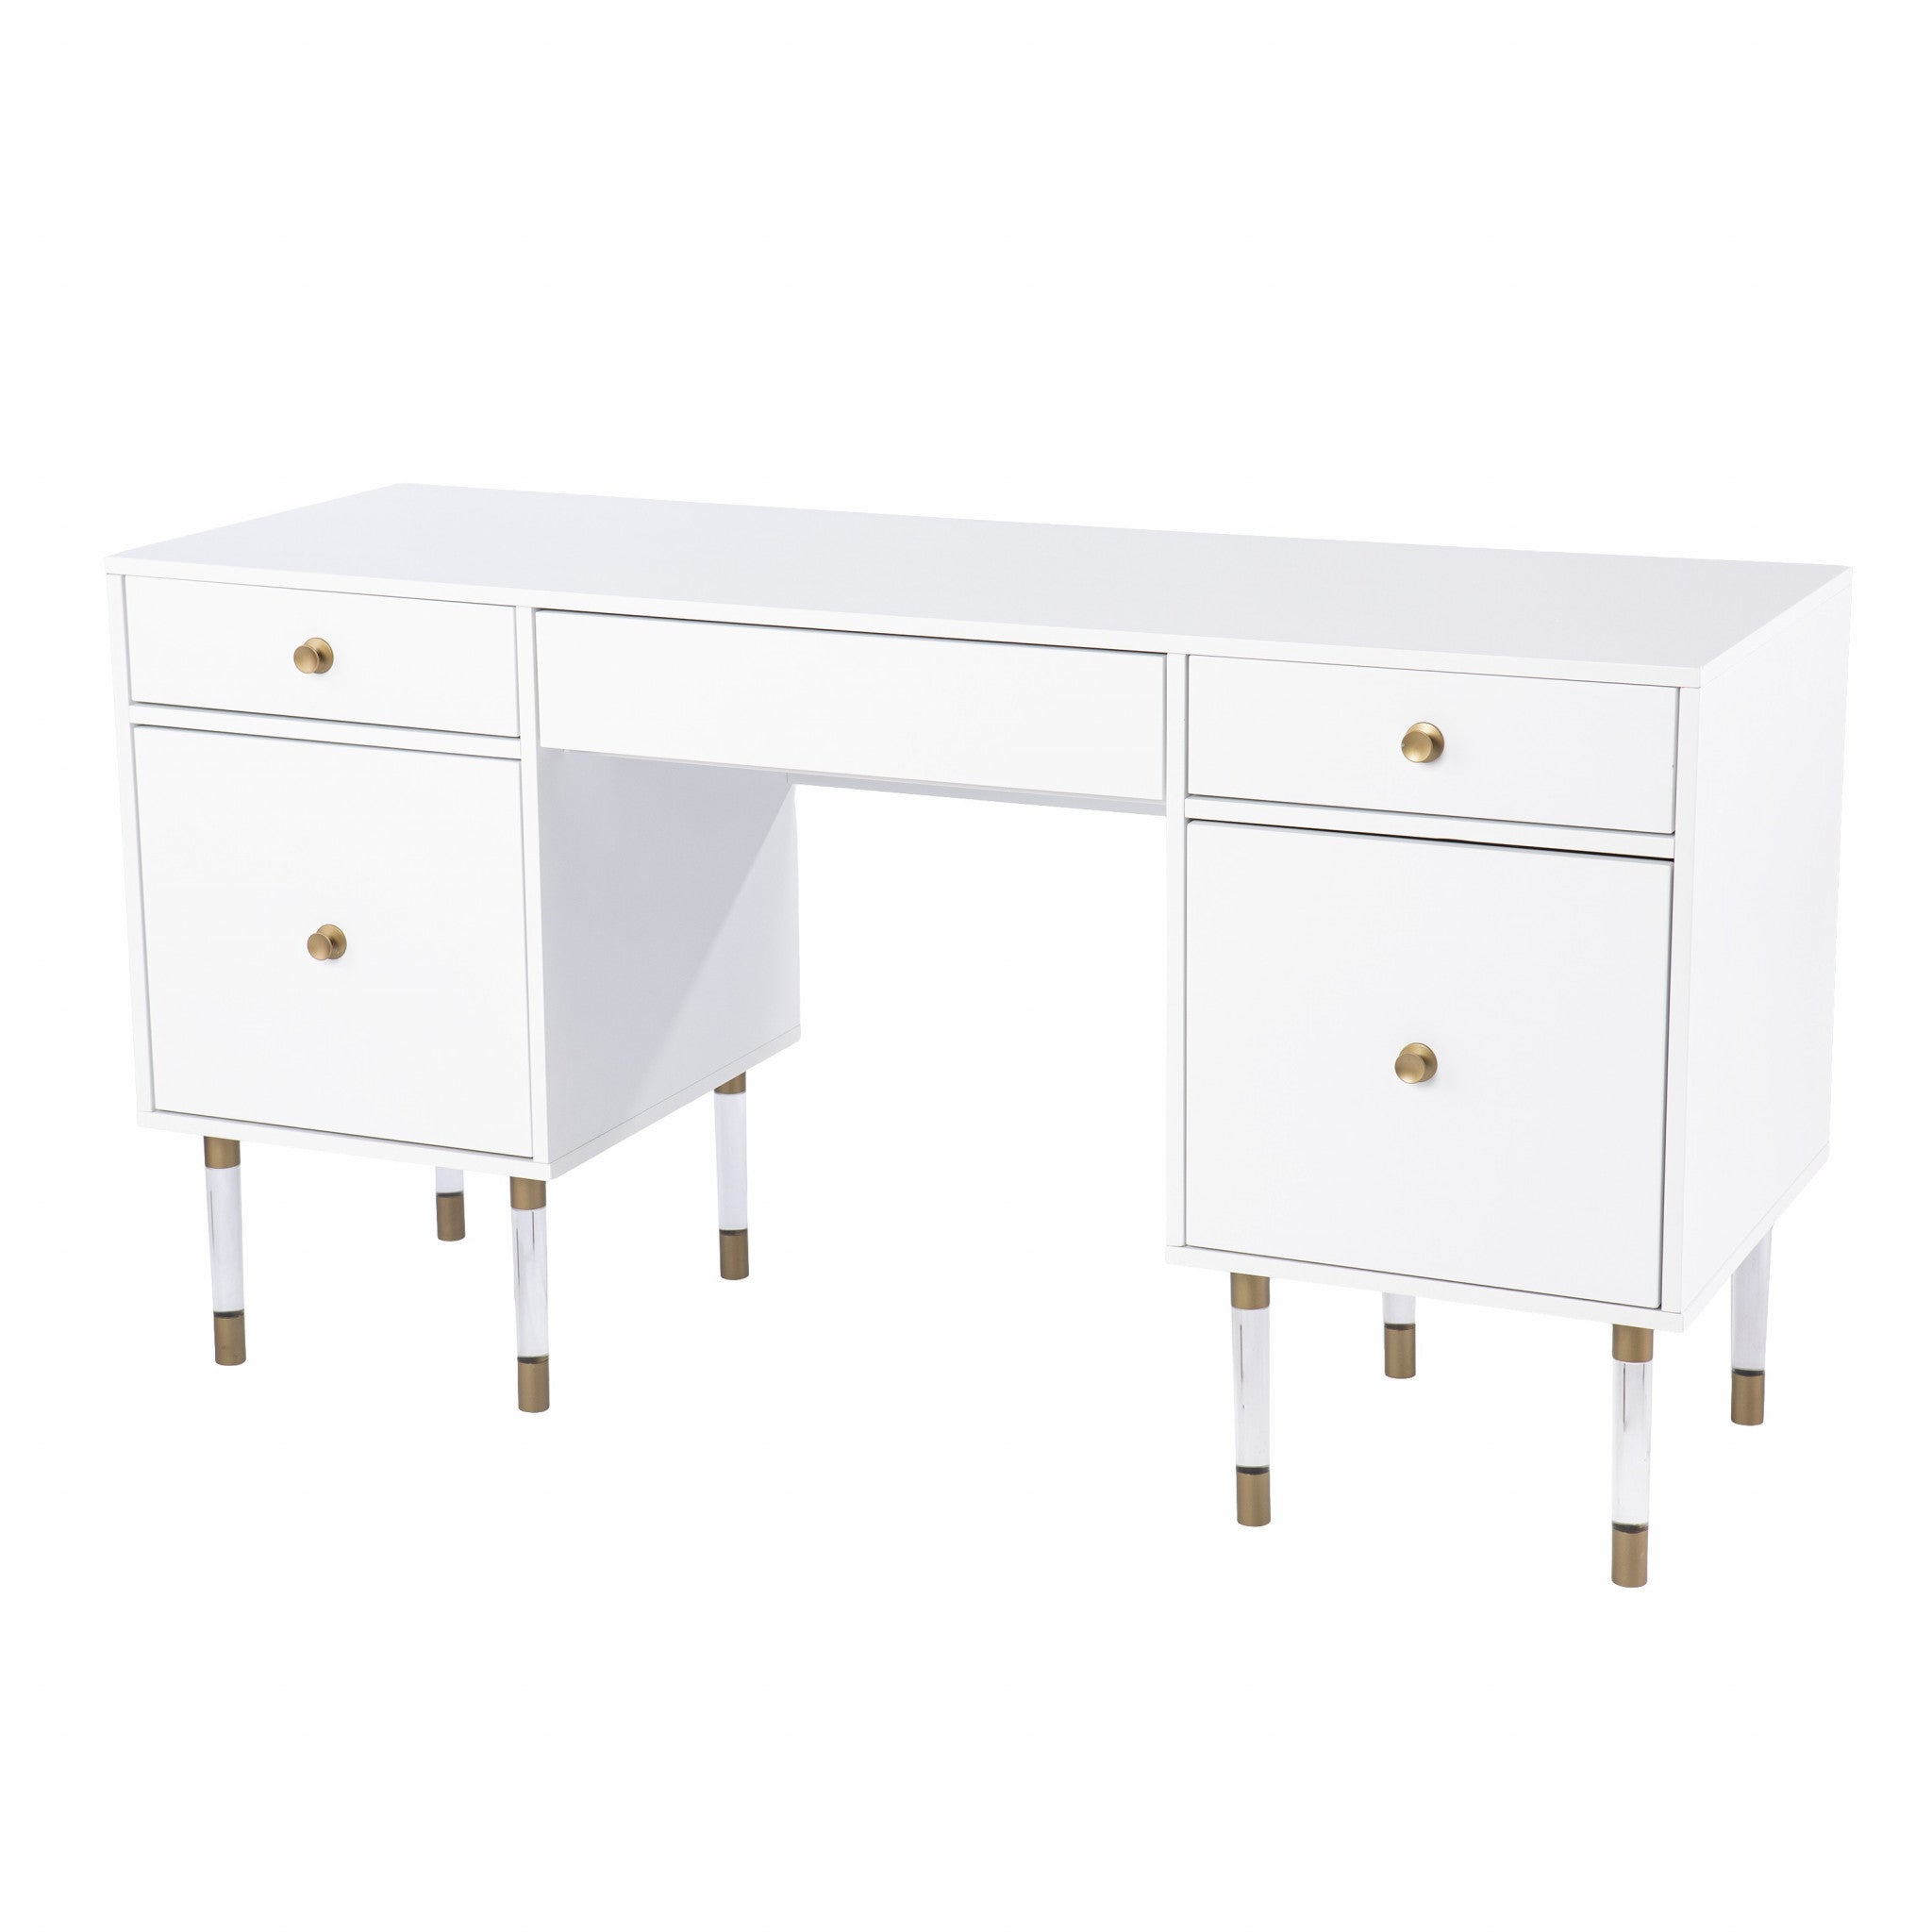 55" White Writing Desk With Four Drawers